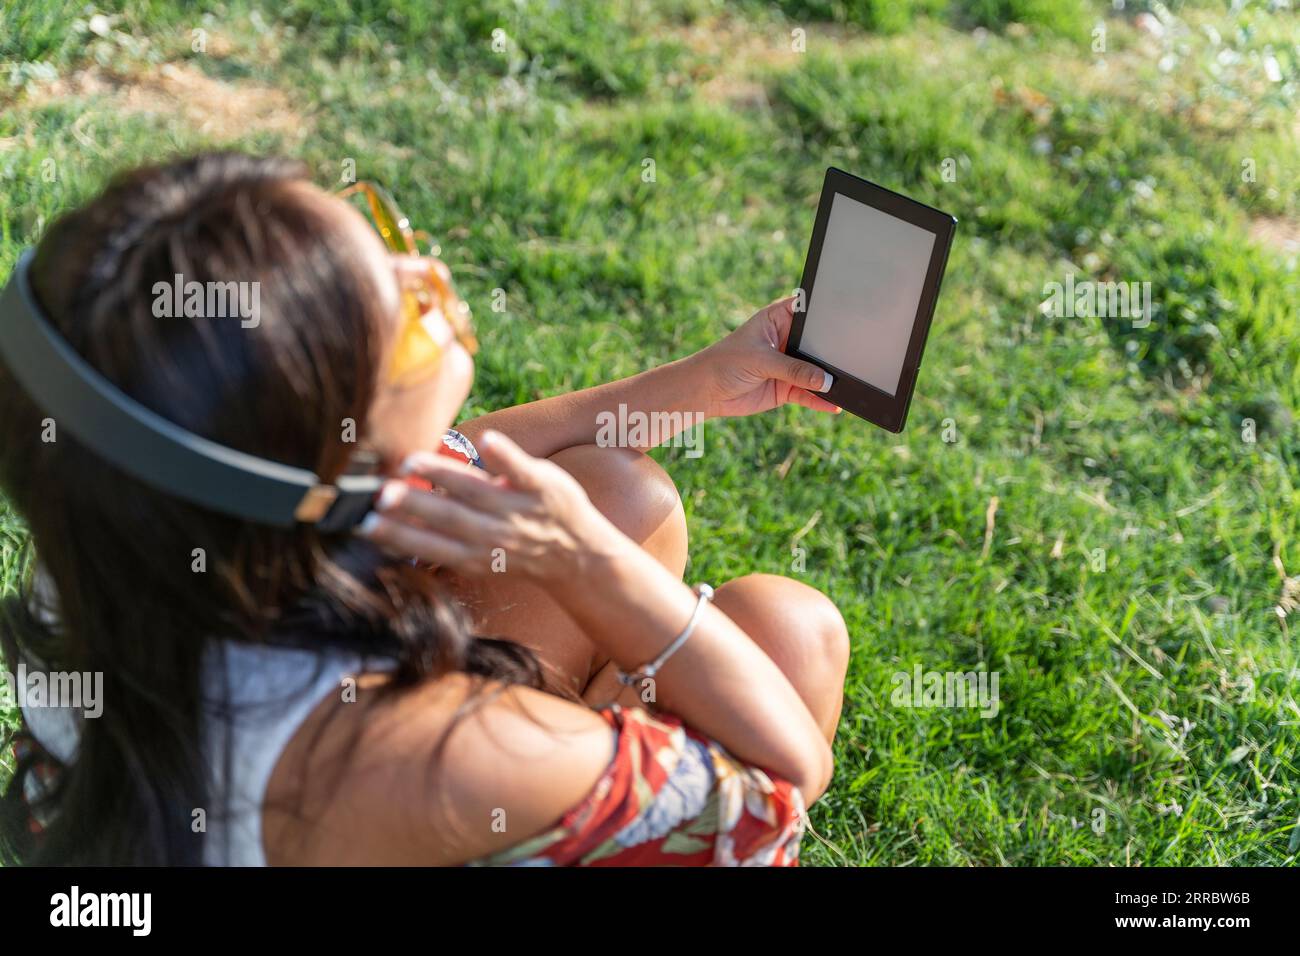 Woman with headphones holding a e-book with blank screen while sitting on grass in a park. Technology concept. Stock Photo